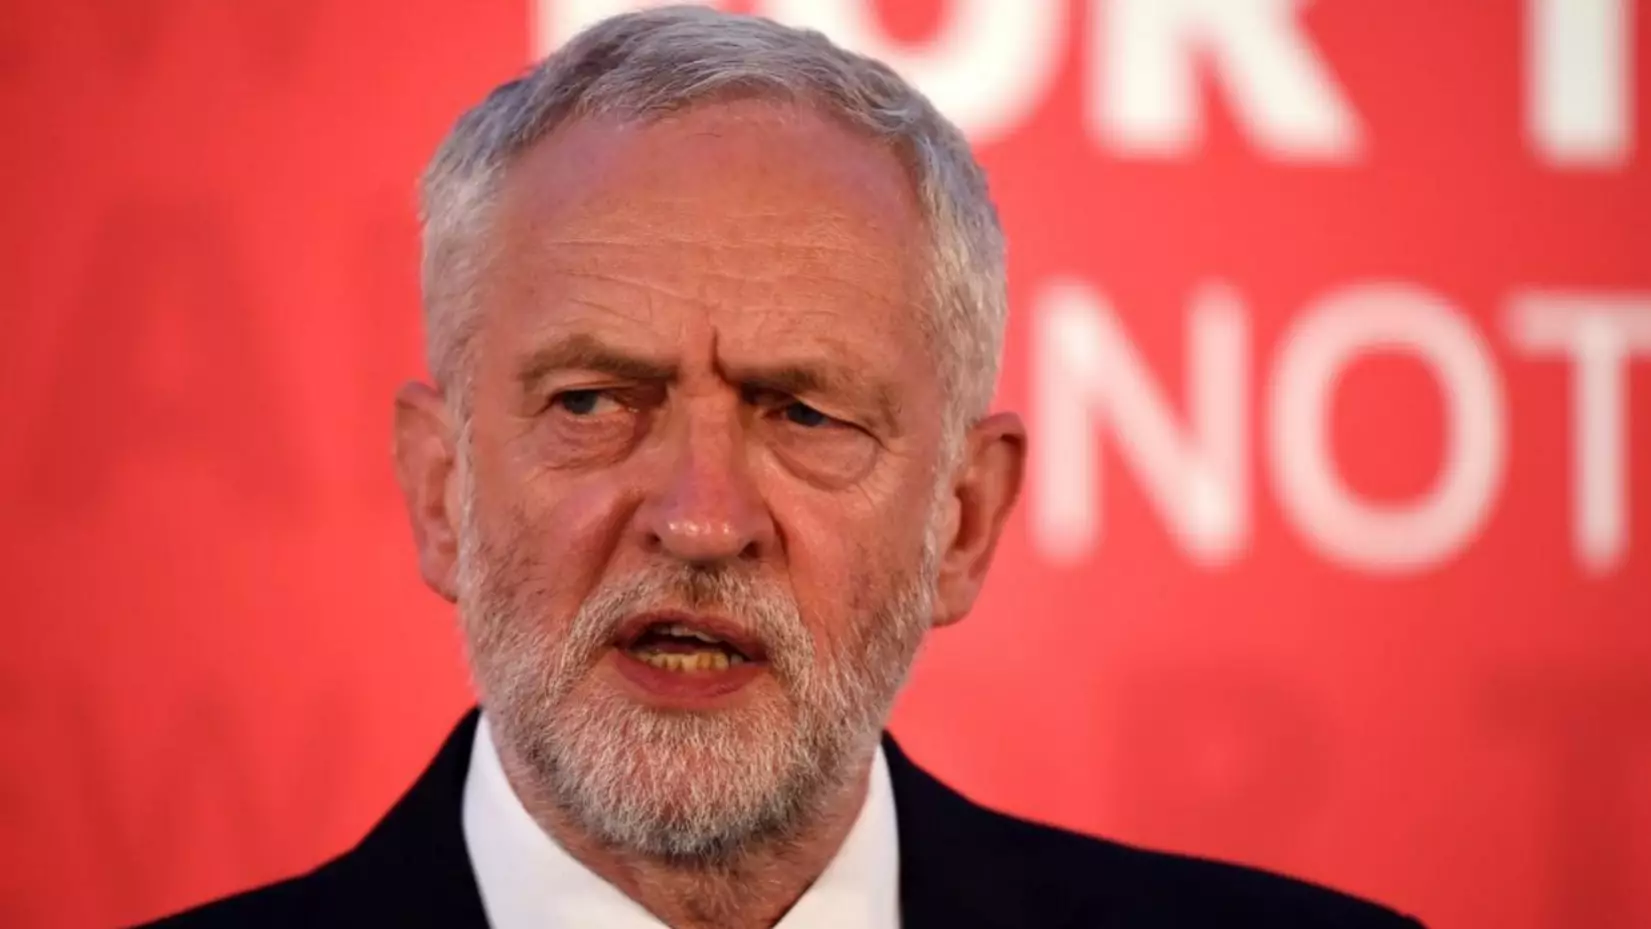 Jeremy Corbyn Backs Call For Theresa May To Resign After London Terror Attack